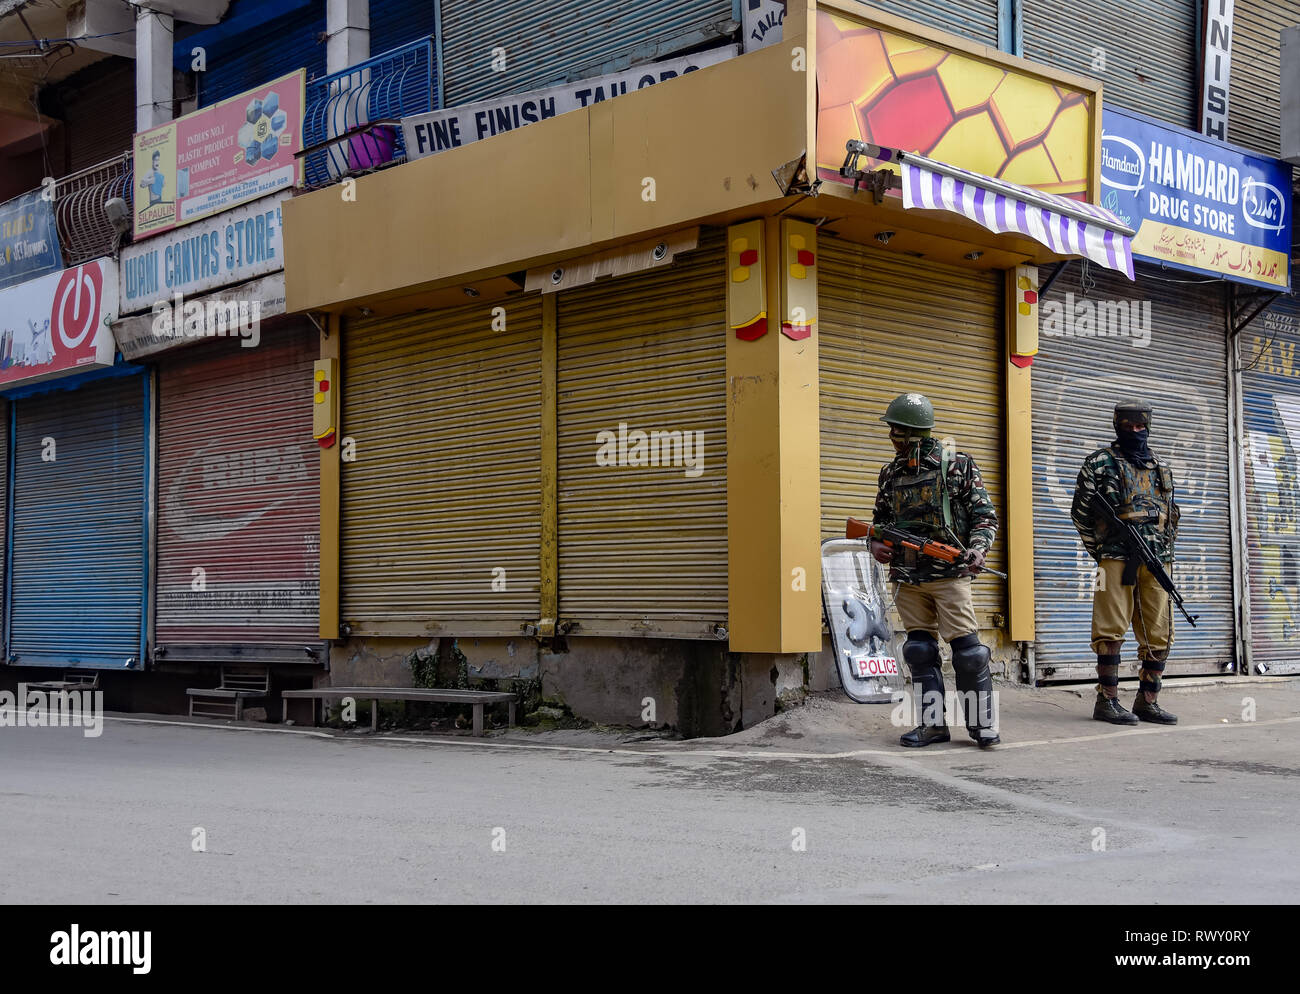 Indian paramilitary troopers are seen standing on guard in-front of closed shop during the shut-down in Maisuma area of Srinagar. A shut-down is being observed in Maisuma area of Srinagar city. Jammu and Kashmir Liberation Front chairman Yasin Malik who was detained on February 22 was booked under Public Safety Act (PSA) and shifted to Kot Balwal jail in Jammu earlier today. Stock Photo